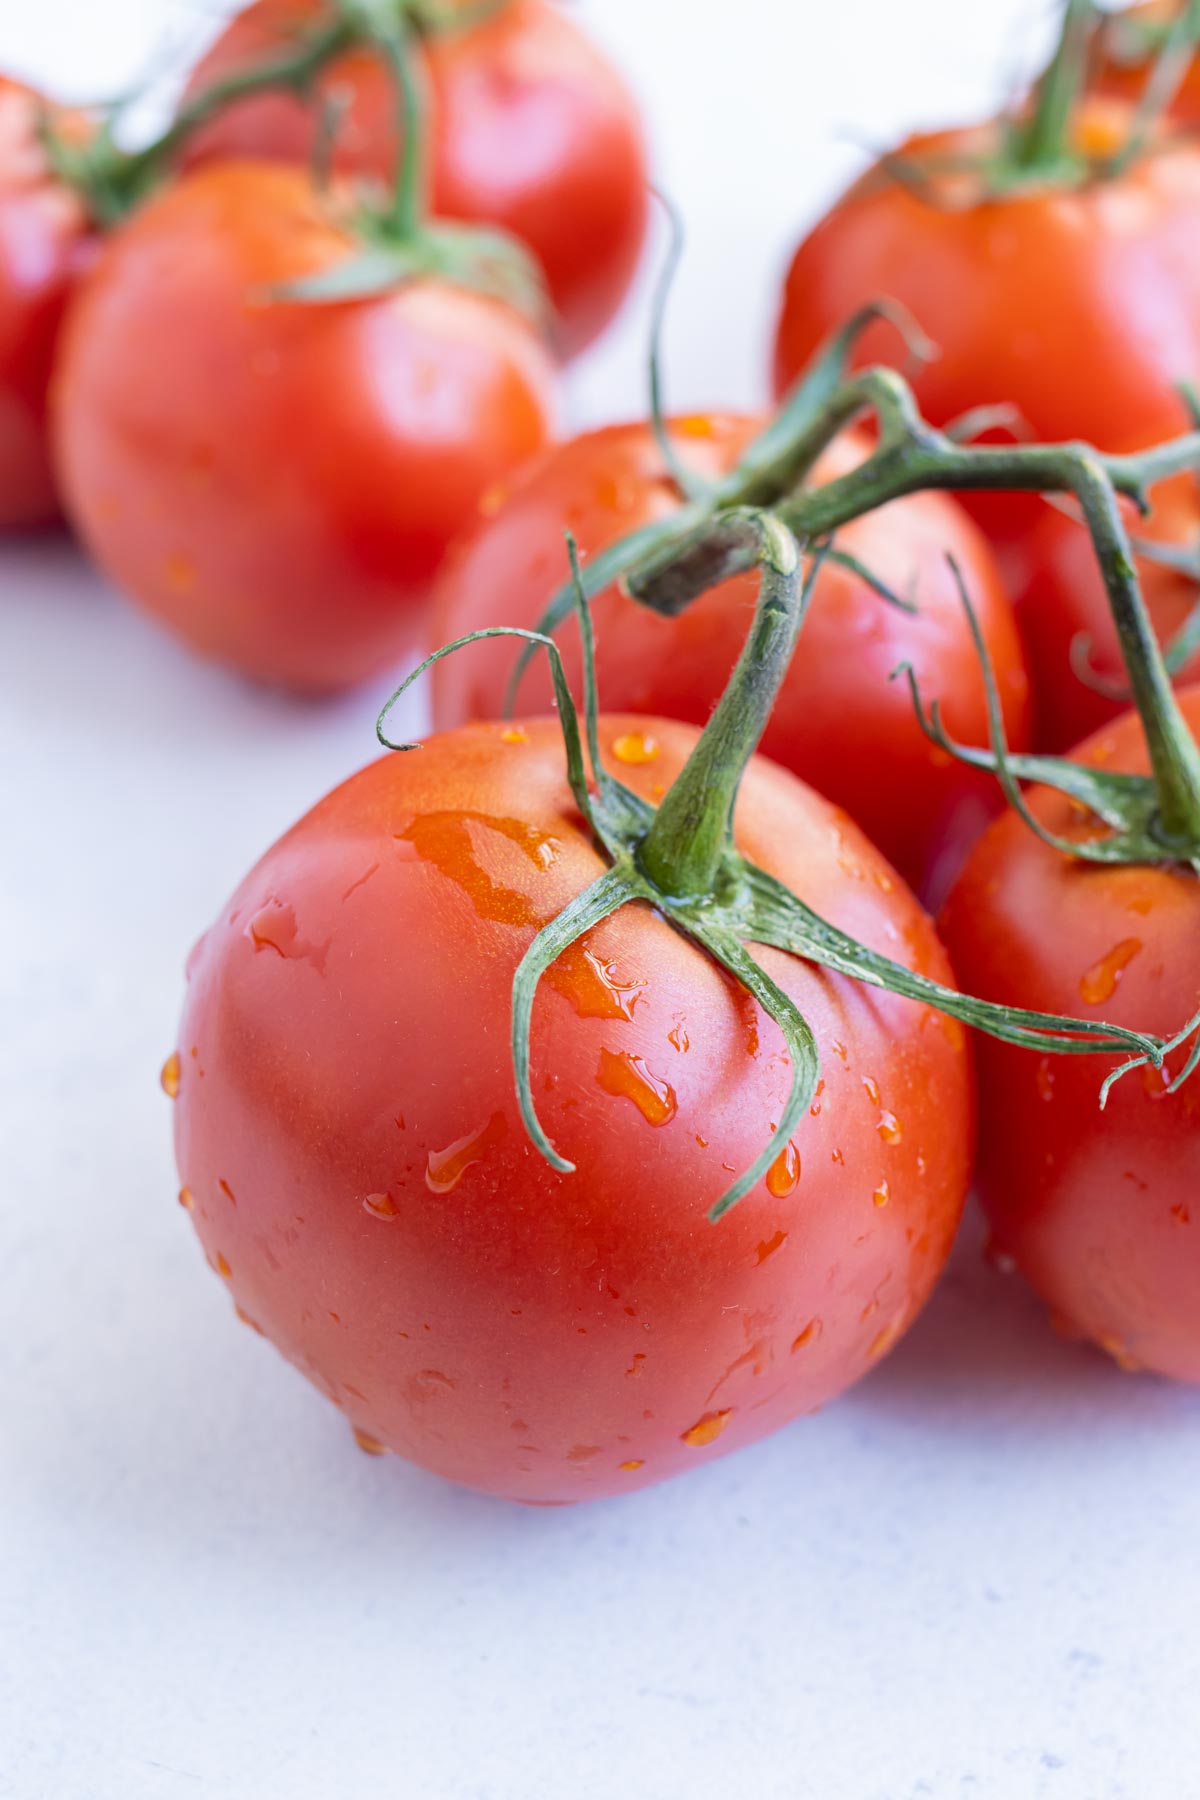 Tomatoes are healthy and tasty in season.